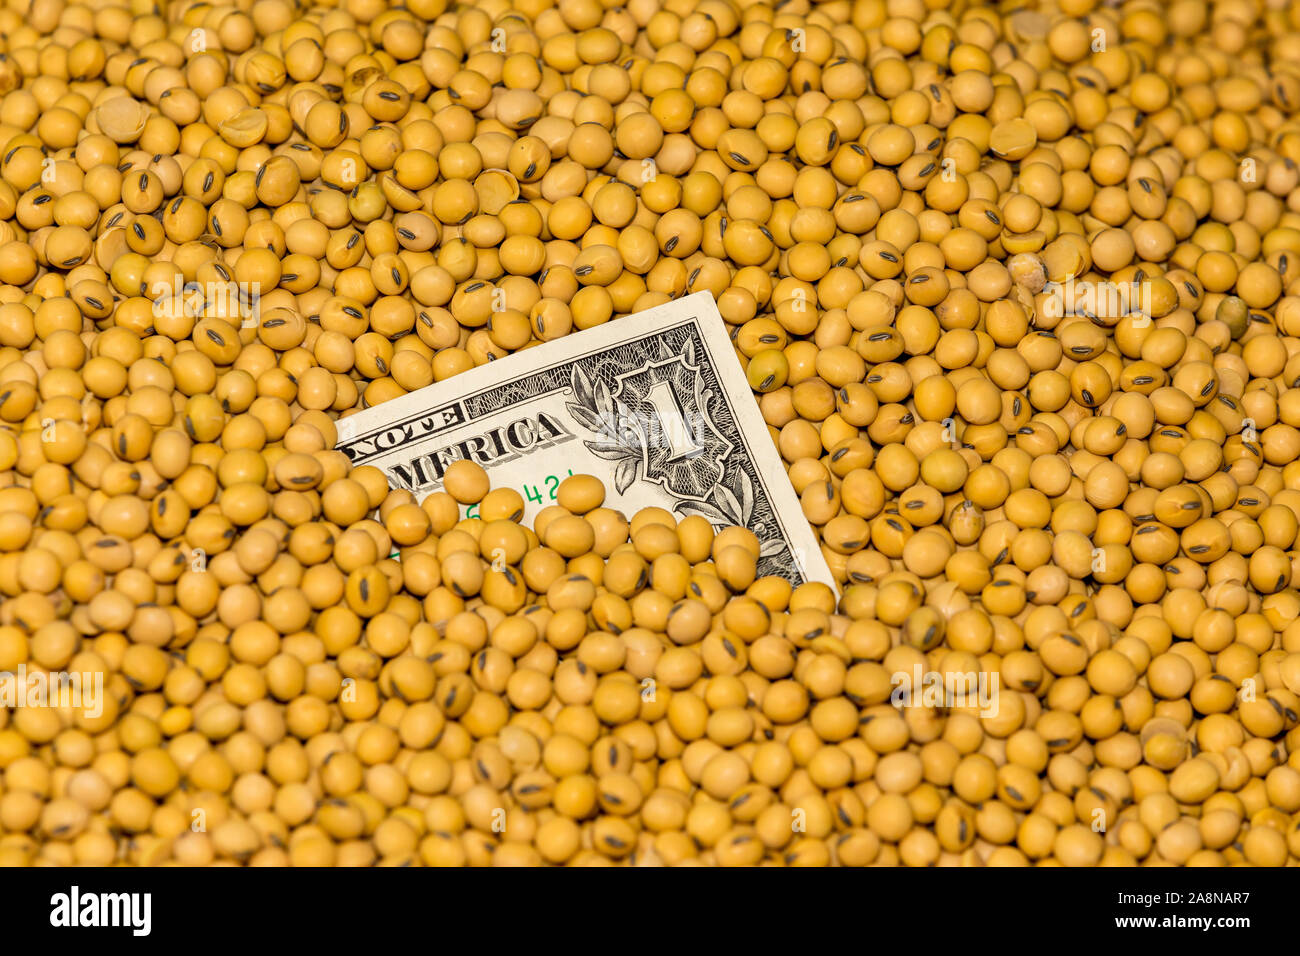 Closeup of harvested soybean seeds covering one dollar bill. Concept of commodity market prices during tariffs and trade war Stock Photo